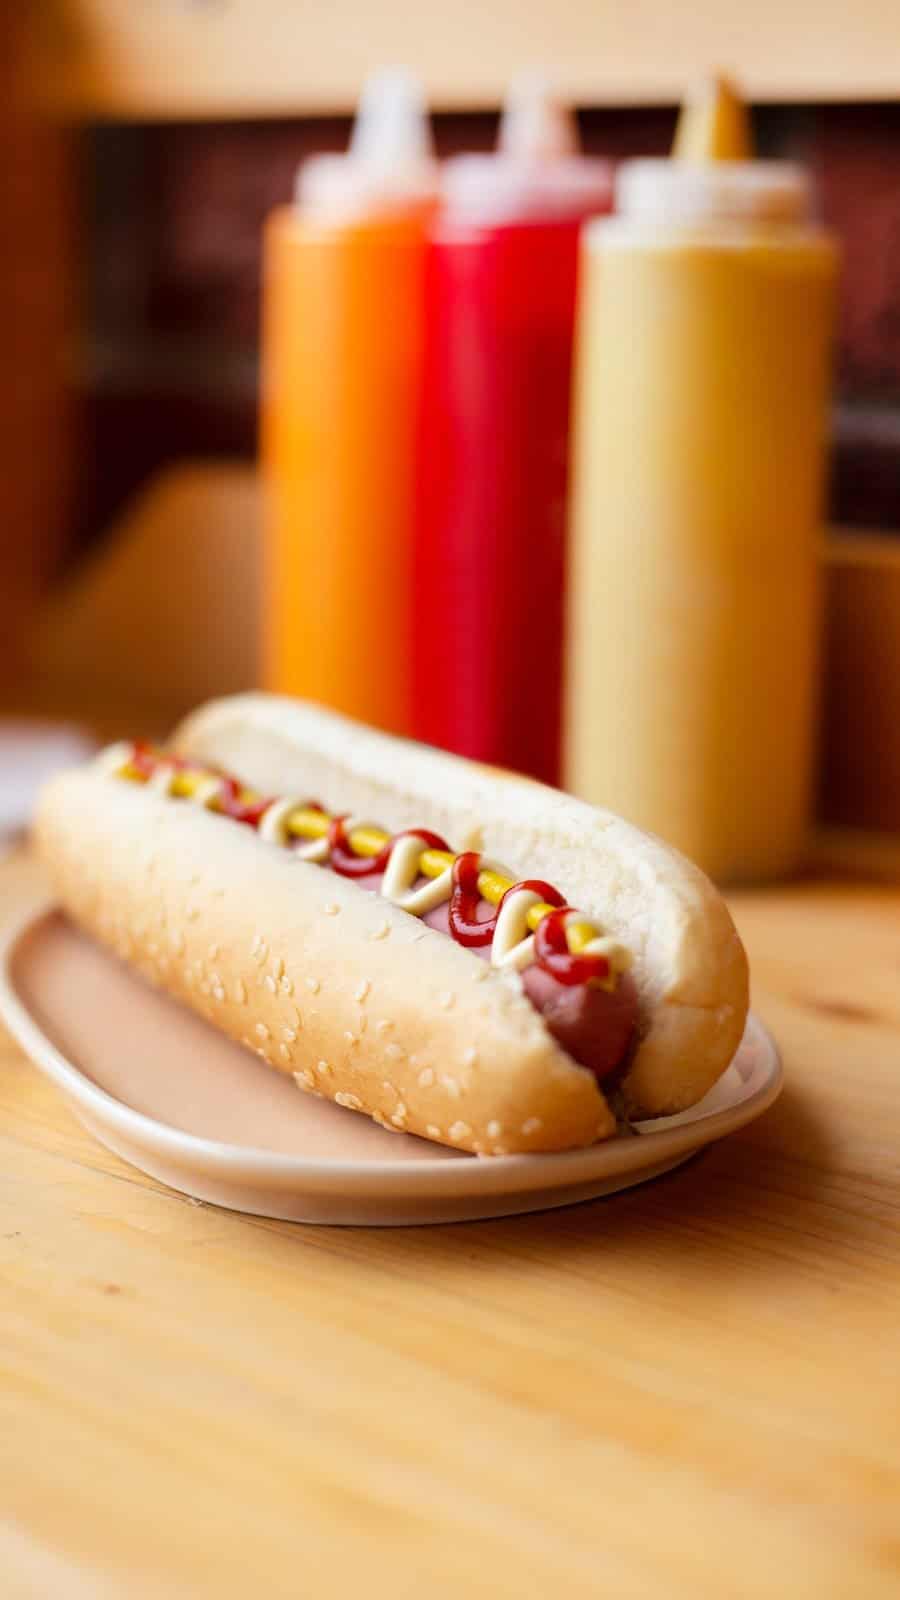 Do Hot Dogs Cause Cancer?